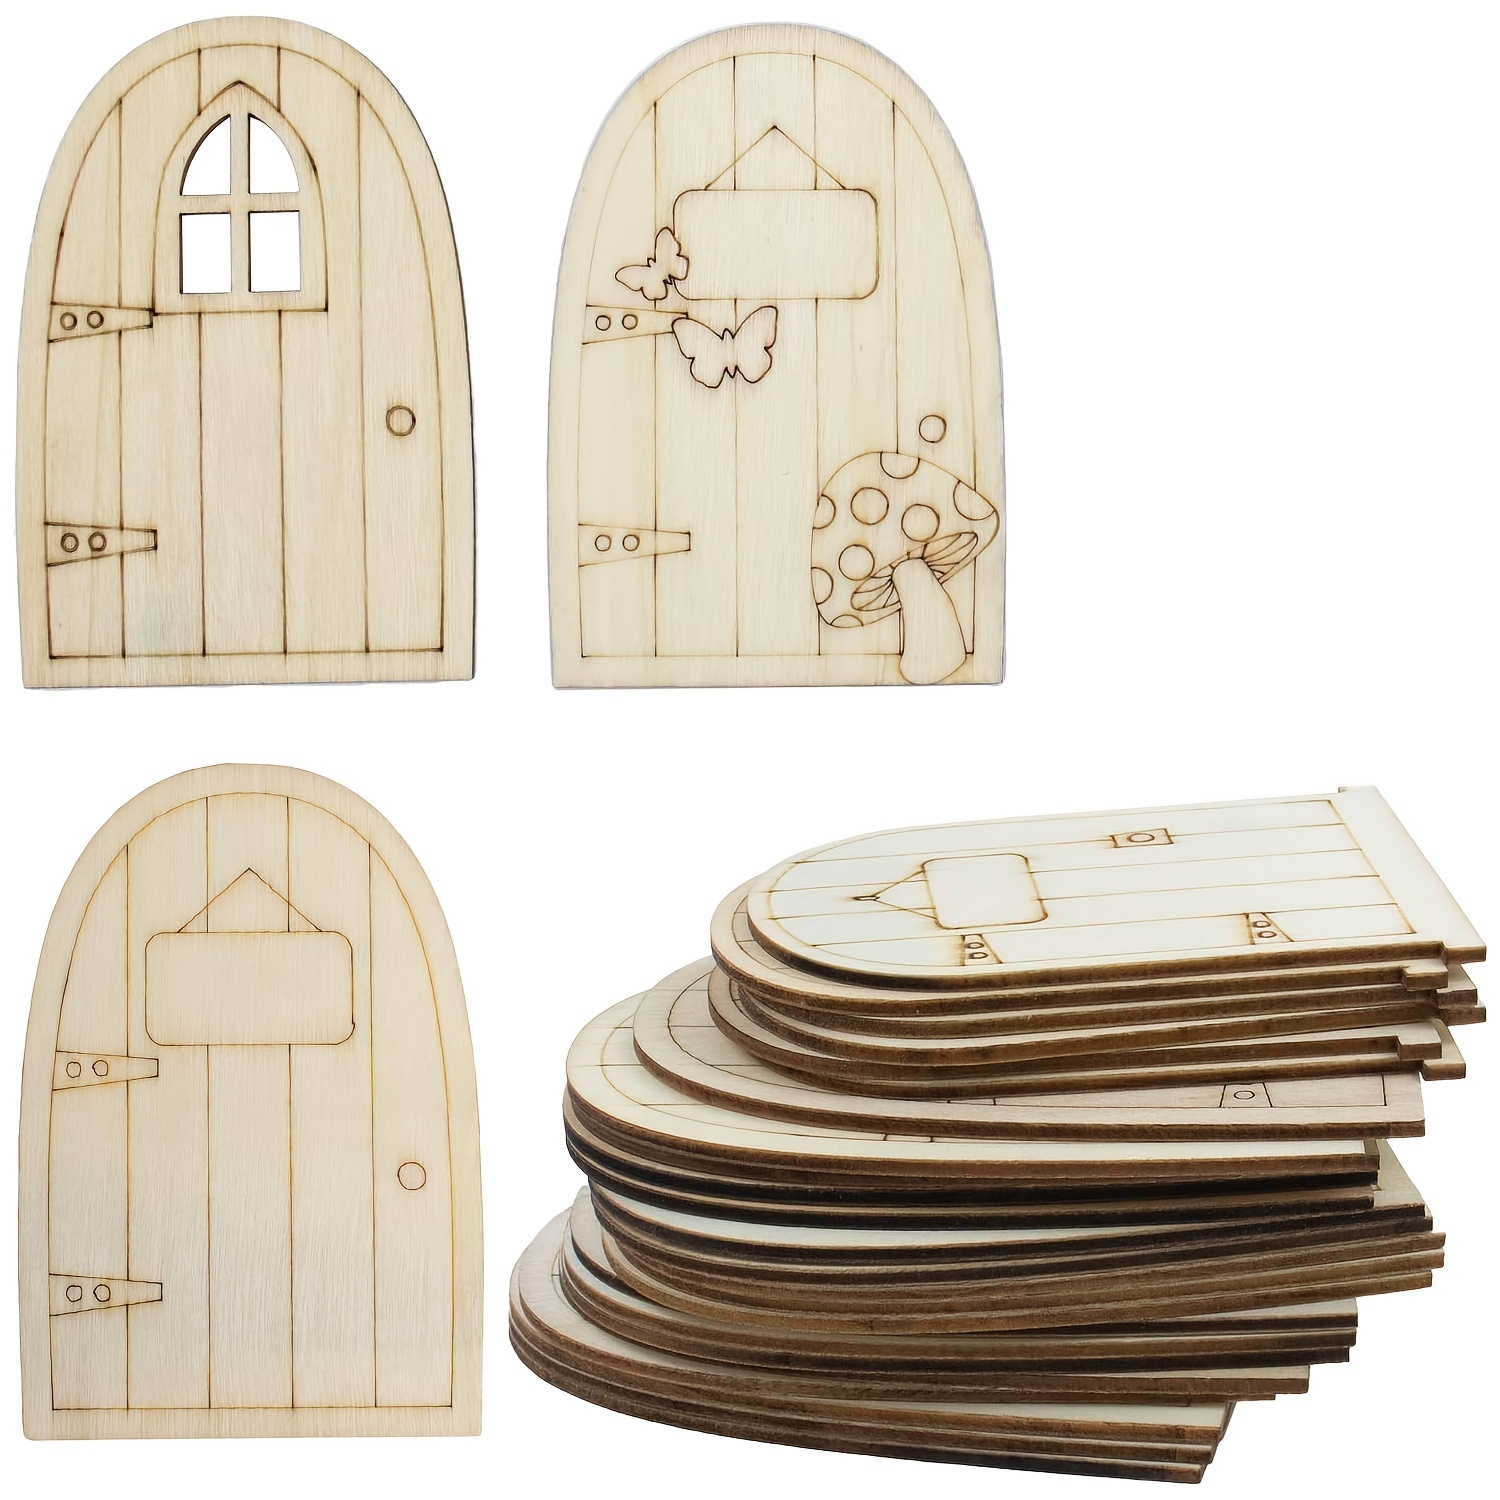 Oval Opening Fairy Door. Oval Three-Dimensional Opening Fairy Door. Wooden  Self Assembly Craft Kit.